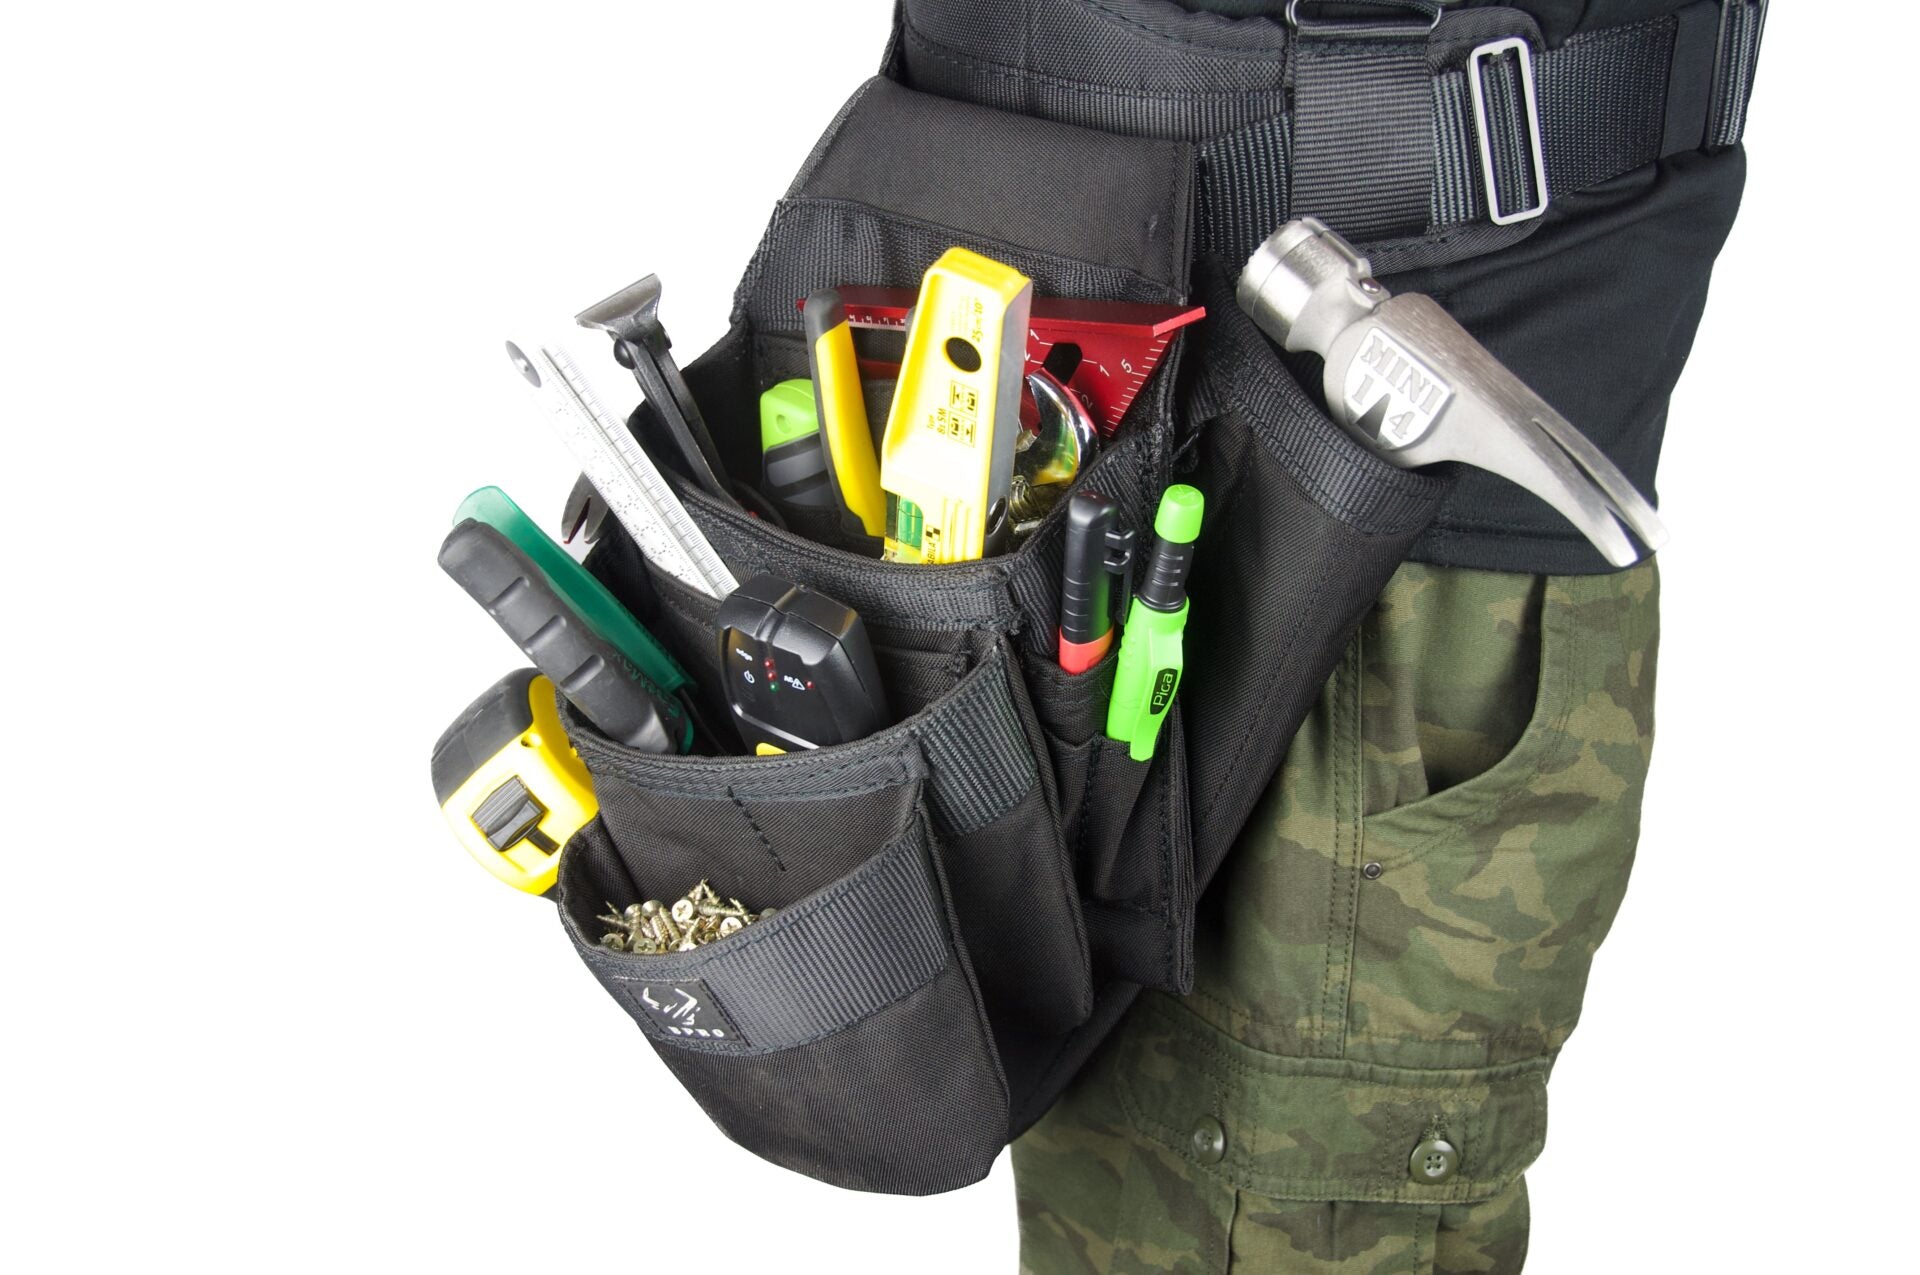 HAMMER HOLSTER (FOR TOOL POUCHES) – Build Pro Store